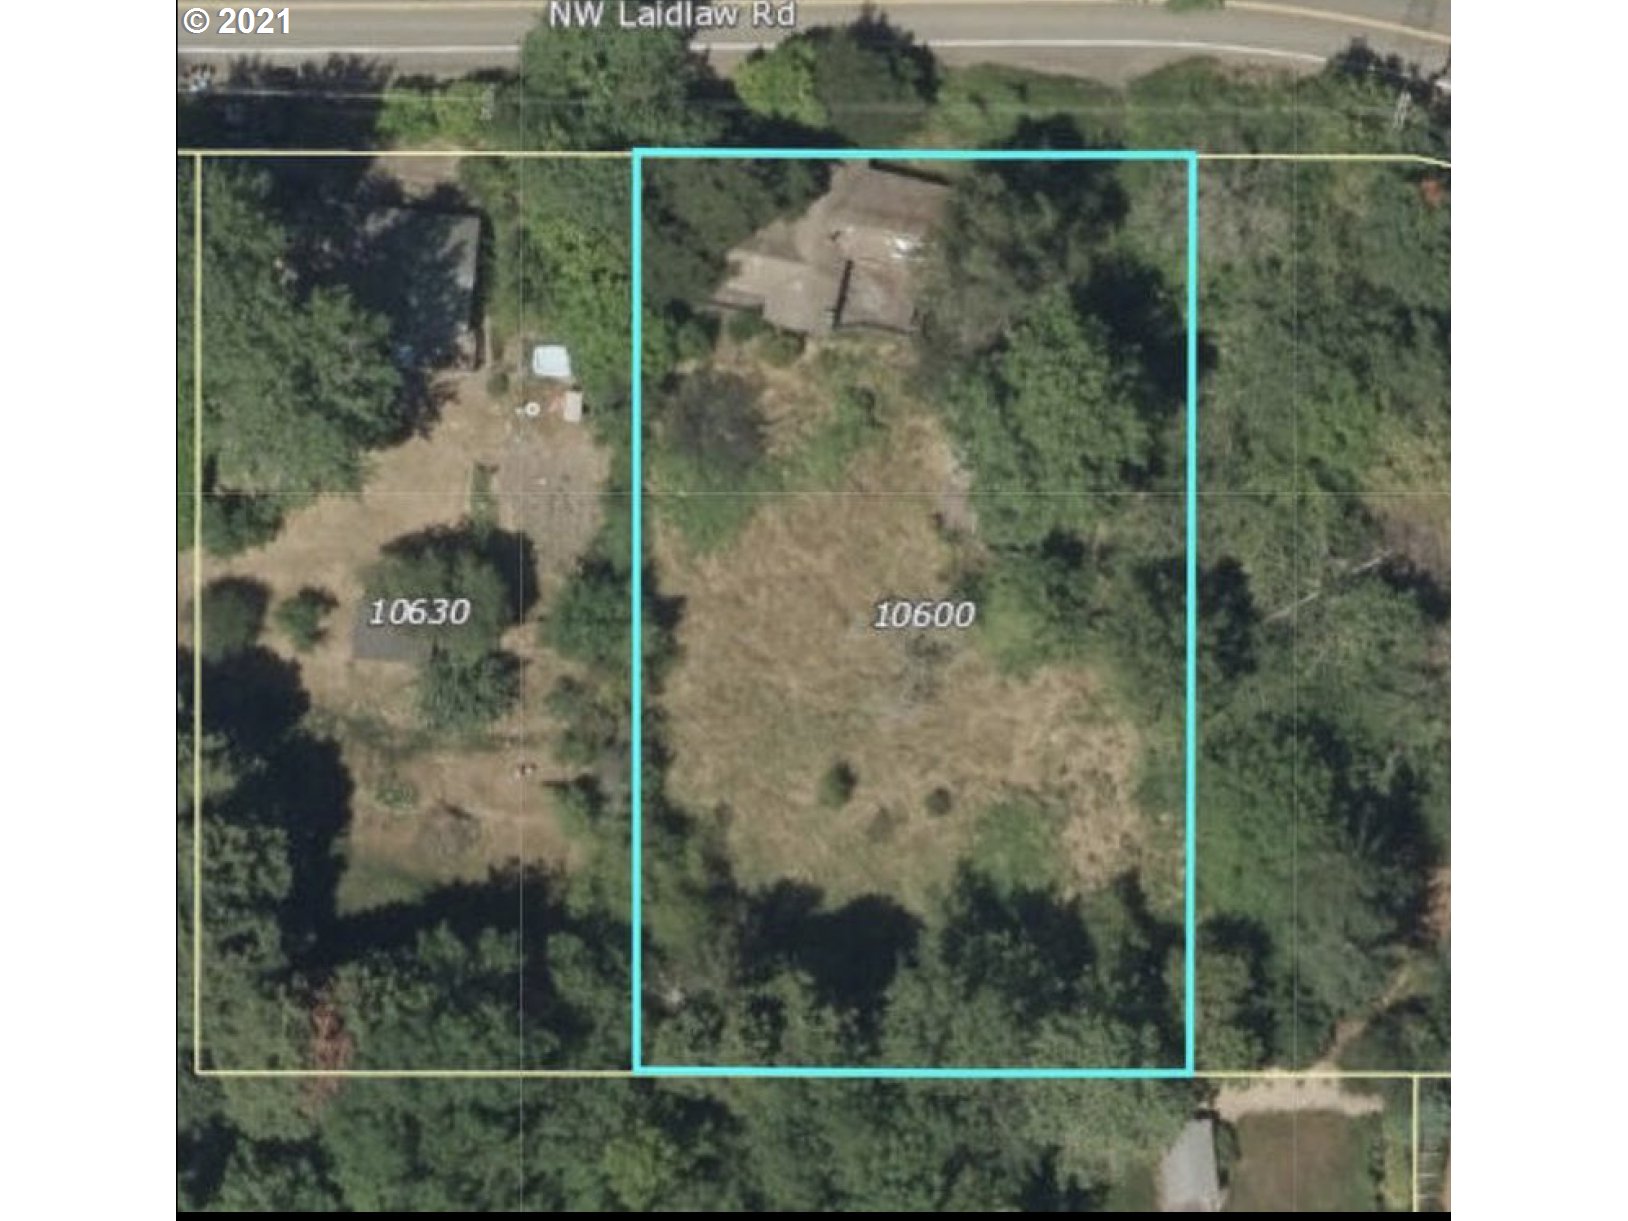 10600 NW LAIDLAW RD (1 of 5)